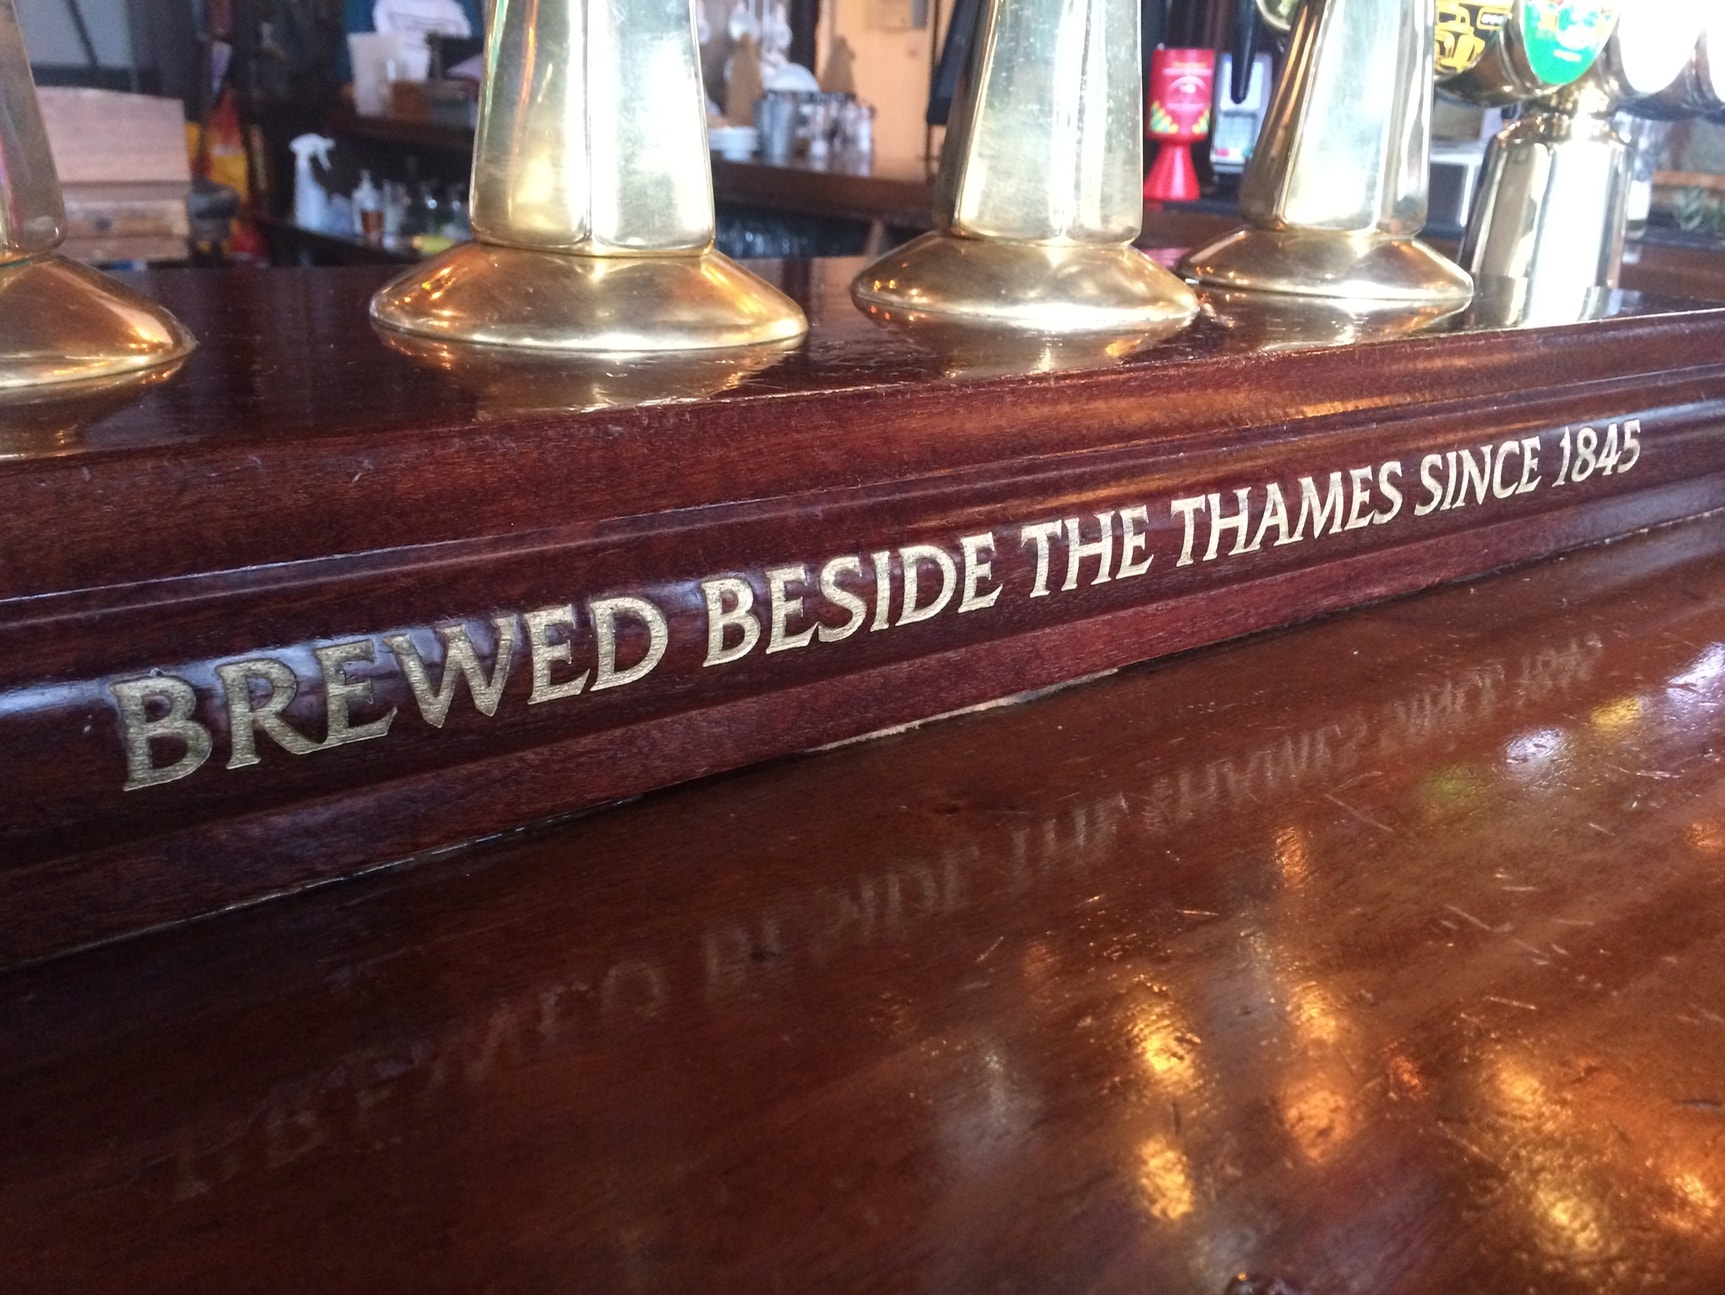 Brewed beside the Thames